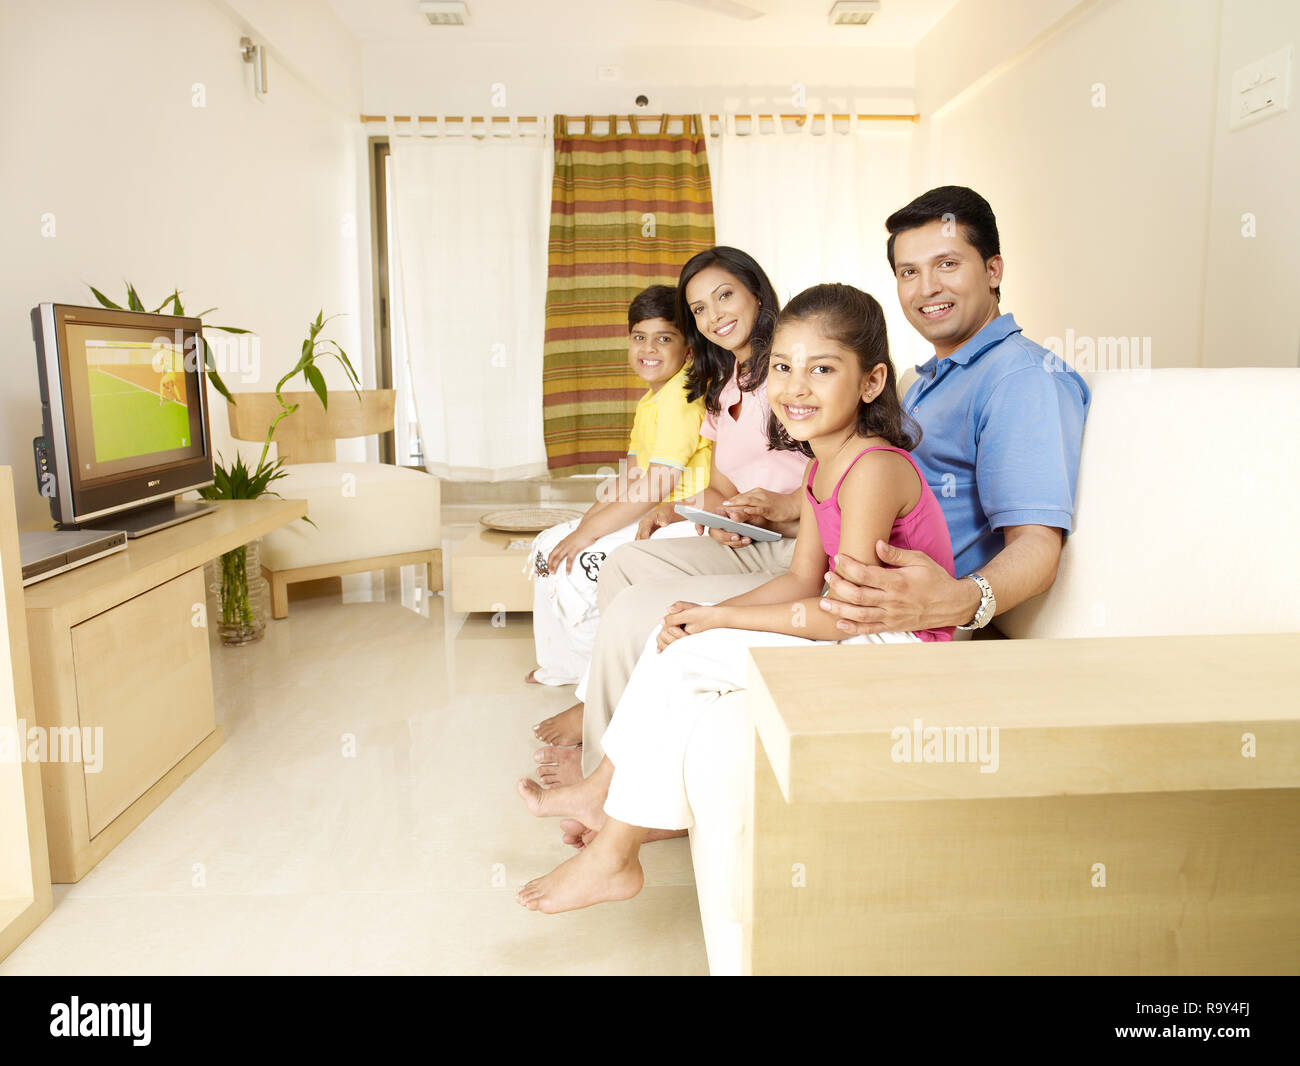 PORTRAIT OF FAMILY OF FOUR WATCHING TV IN THEIR HOME Stock Photo